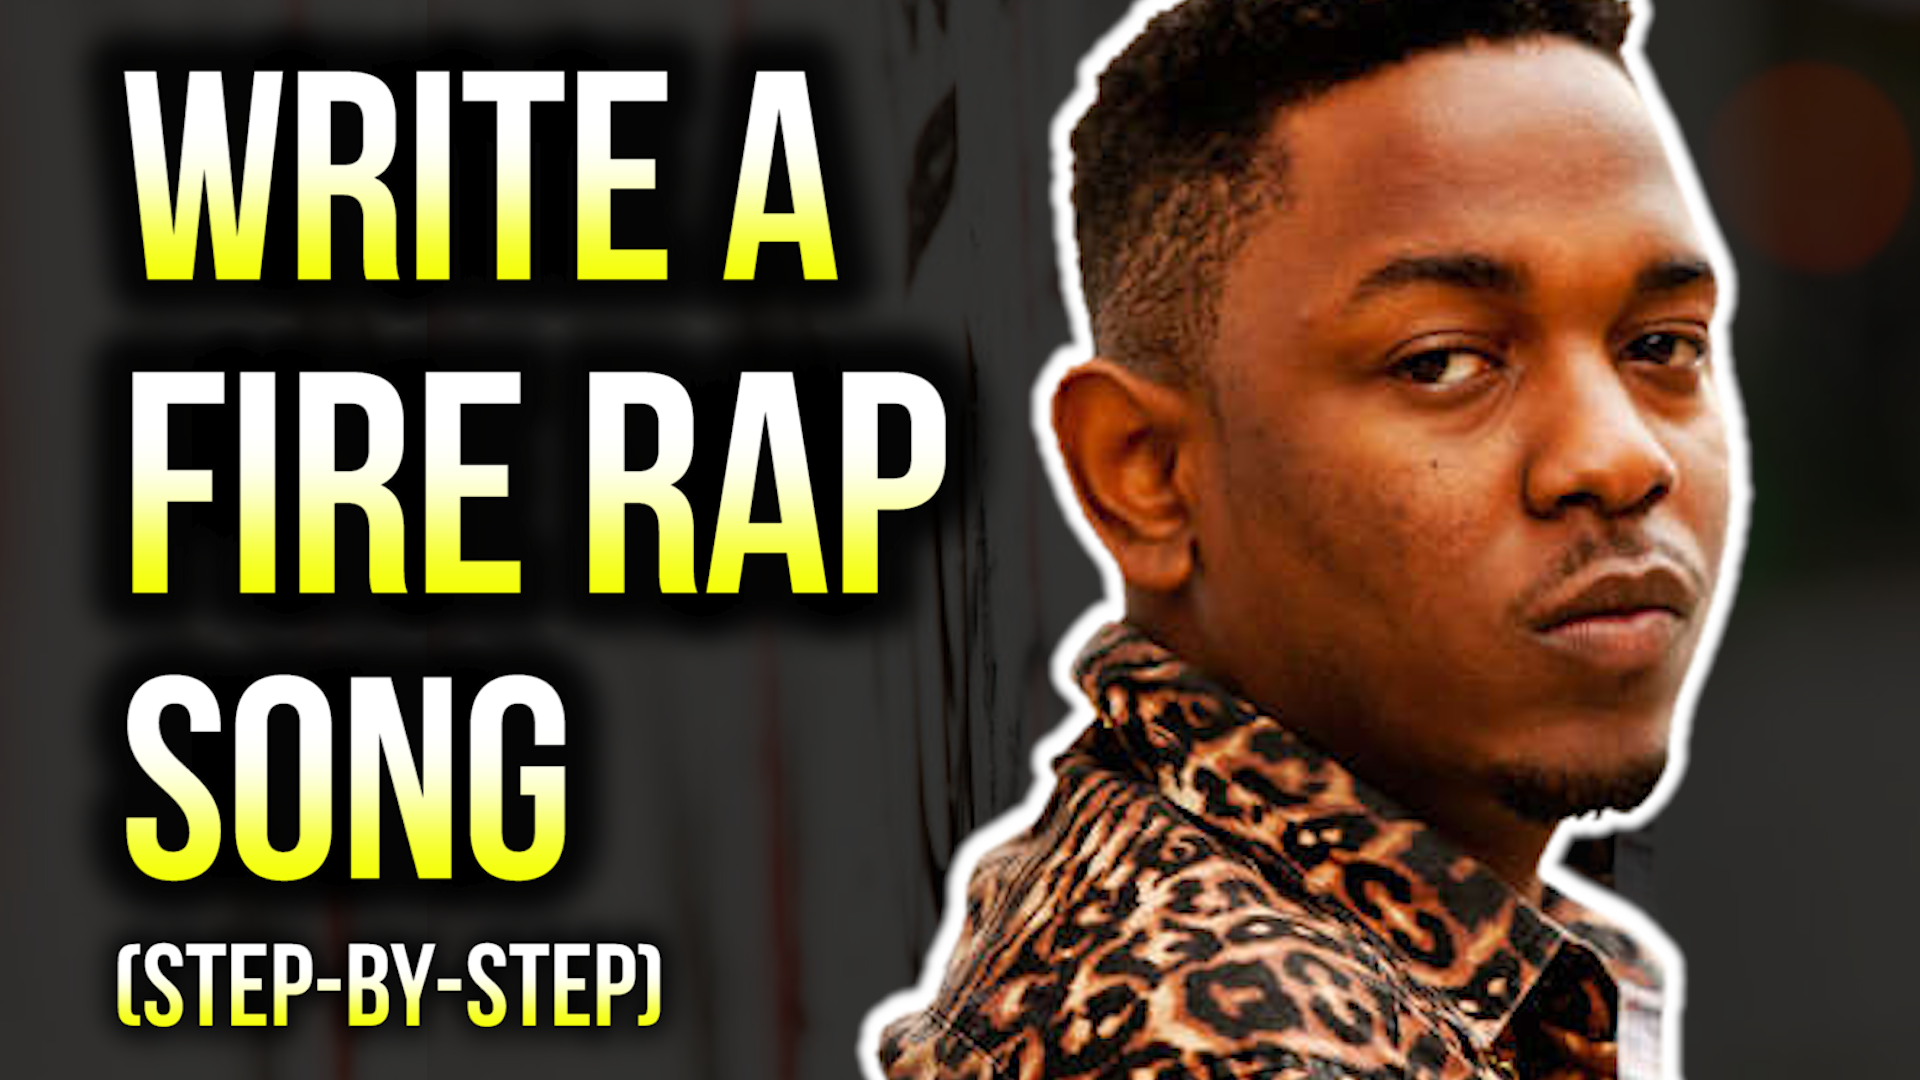 How To Write A Dope Rap Song, Step-By-Step